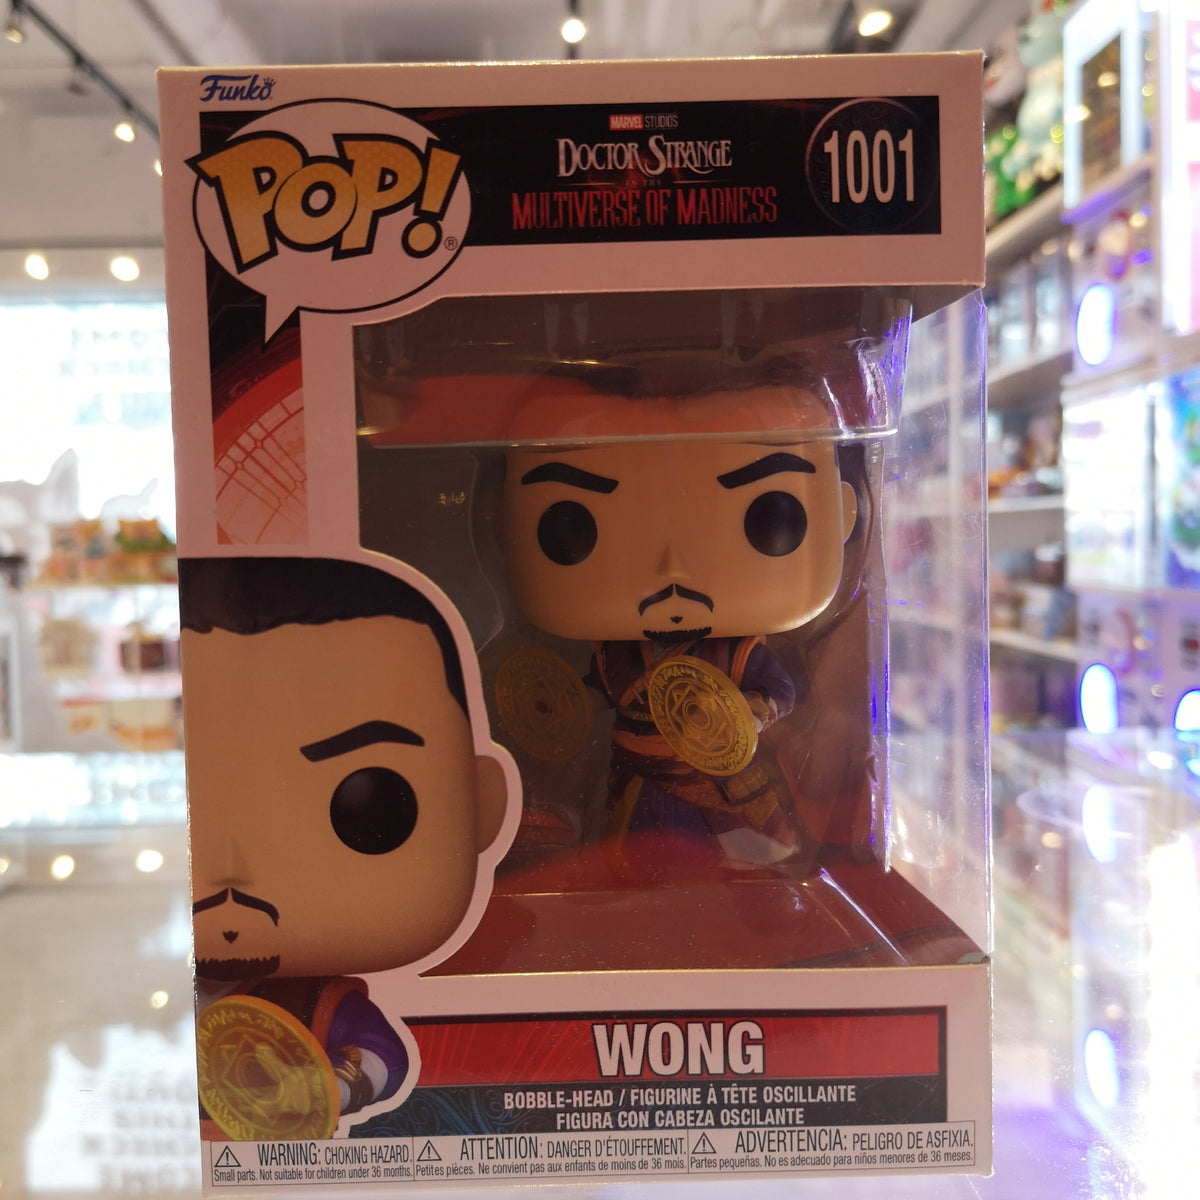 Wong - Doctor Strange in the Multiverse of Madness Funko POP! by Funko